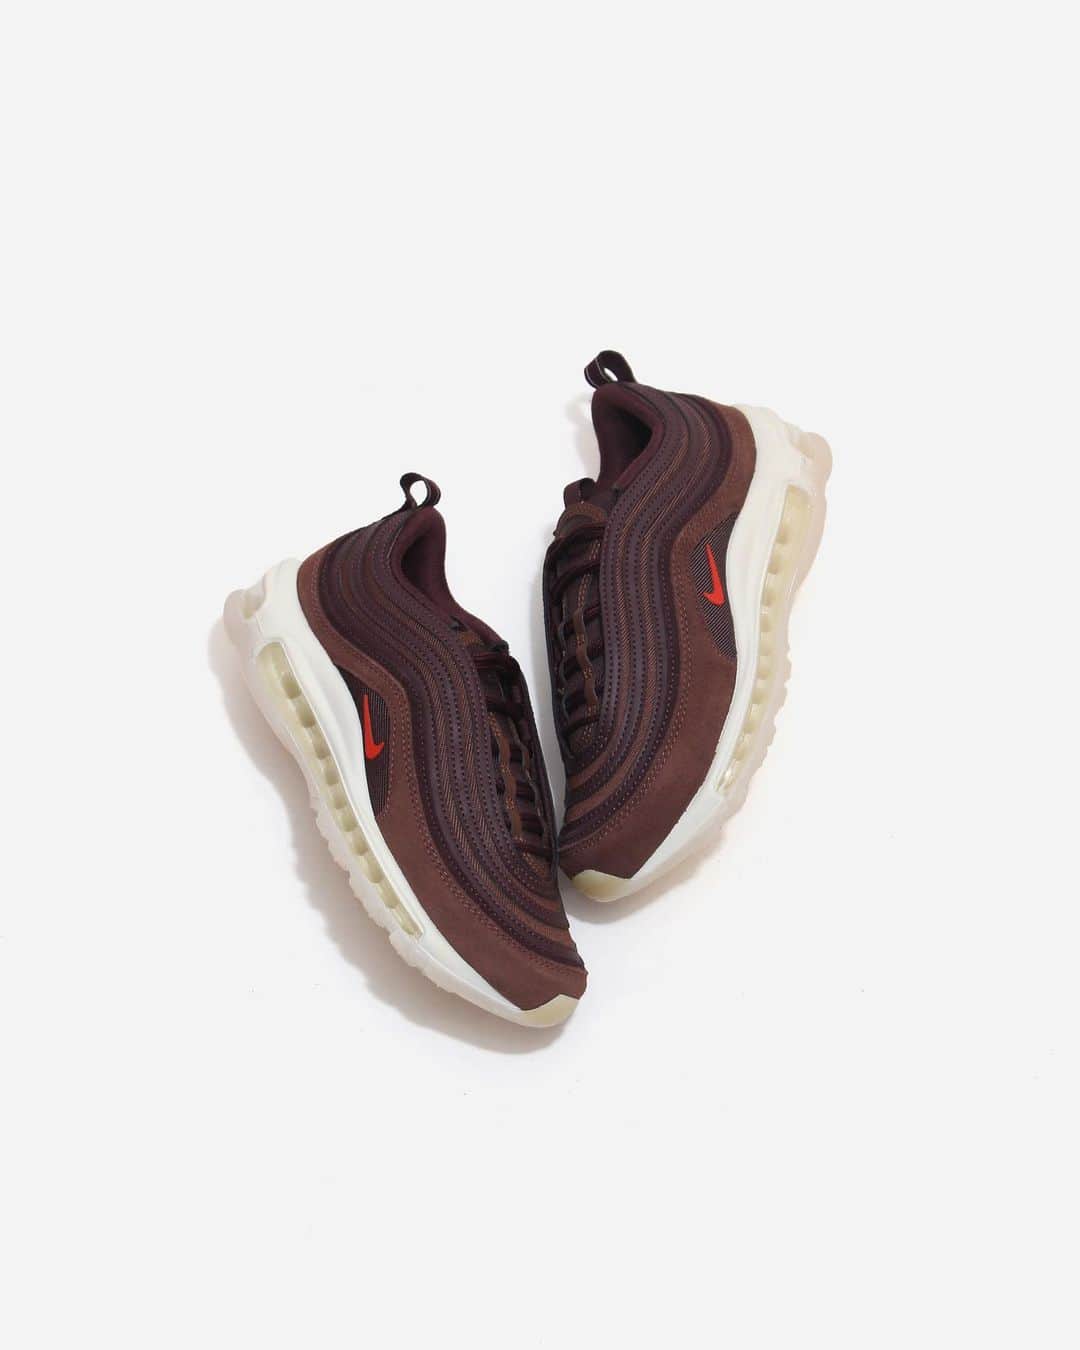 A+Sのインスタグラム：「2021. 2. 1 (mon) in store  ■NIKE WMNS AIR MAX 97 SE COLOR : AUNA BROWN SIZE : 22.5cm - 25.0cm PRICE : ¥19,000 (+TAX)  カフェカルチャーののんびりとした雰囲気からインスピレーションを得て作られたカフェラテパック。豊かで温かみのあるラテがカラーベースになったAIR MAX 97です。  A cafe latte pack inspired by the laid-back atmosphere of cafe culture. The AIR MAX 97 is a color-based color-based latte with a rich and warm atmosphere.   #a_and_s #NIKE #NIKEAIRMAX #NIKEAIRMAX97 #NIKECAFFELATTEPACK」